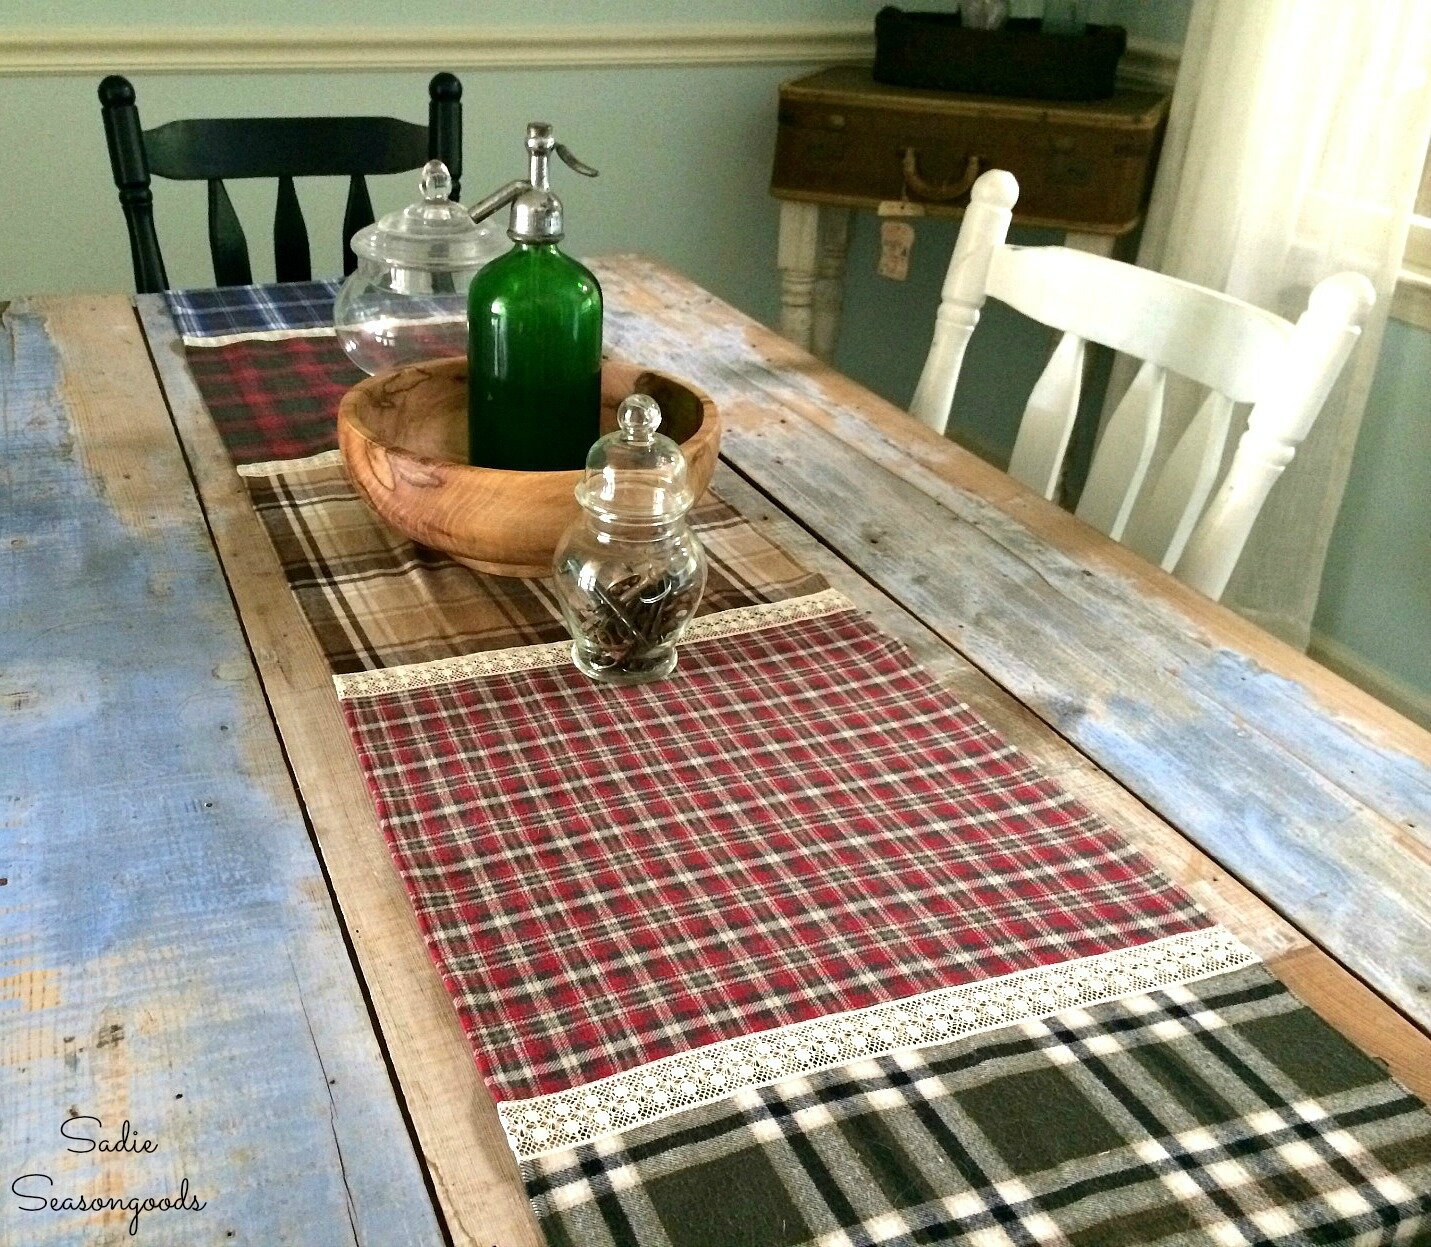 Fall-table-runner-with-flannel-fabric-from-second-hand-clothes-and-lace-ribbon-for-a-cozy-home-and-rustic-home-decor-by-Sadie-Seasongoods.jpg